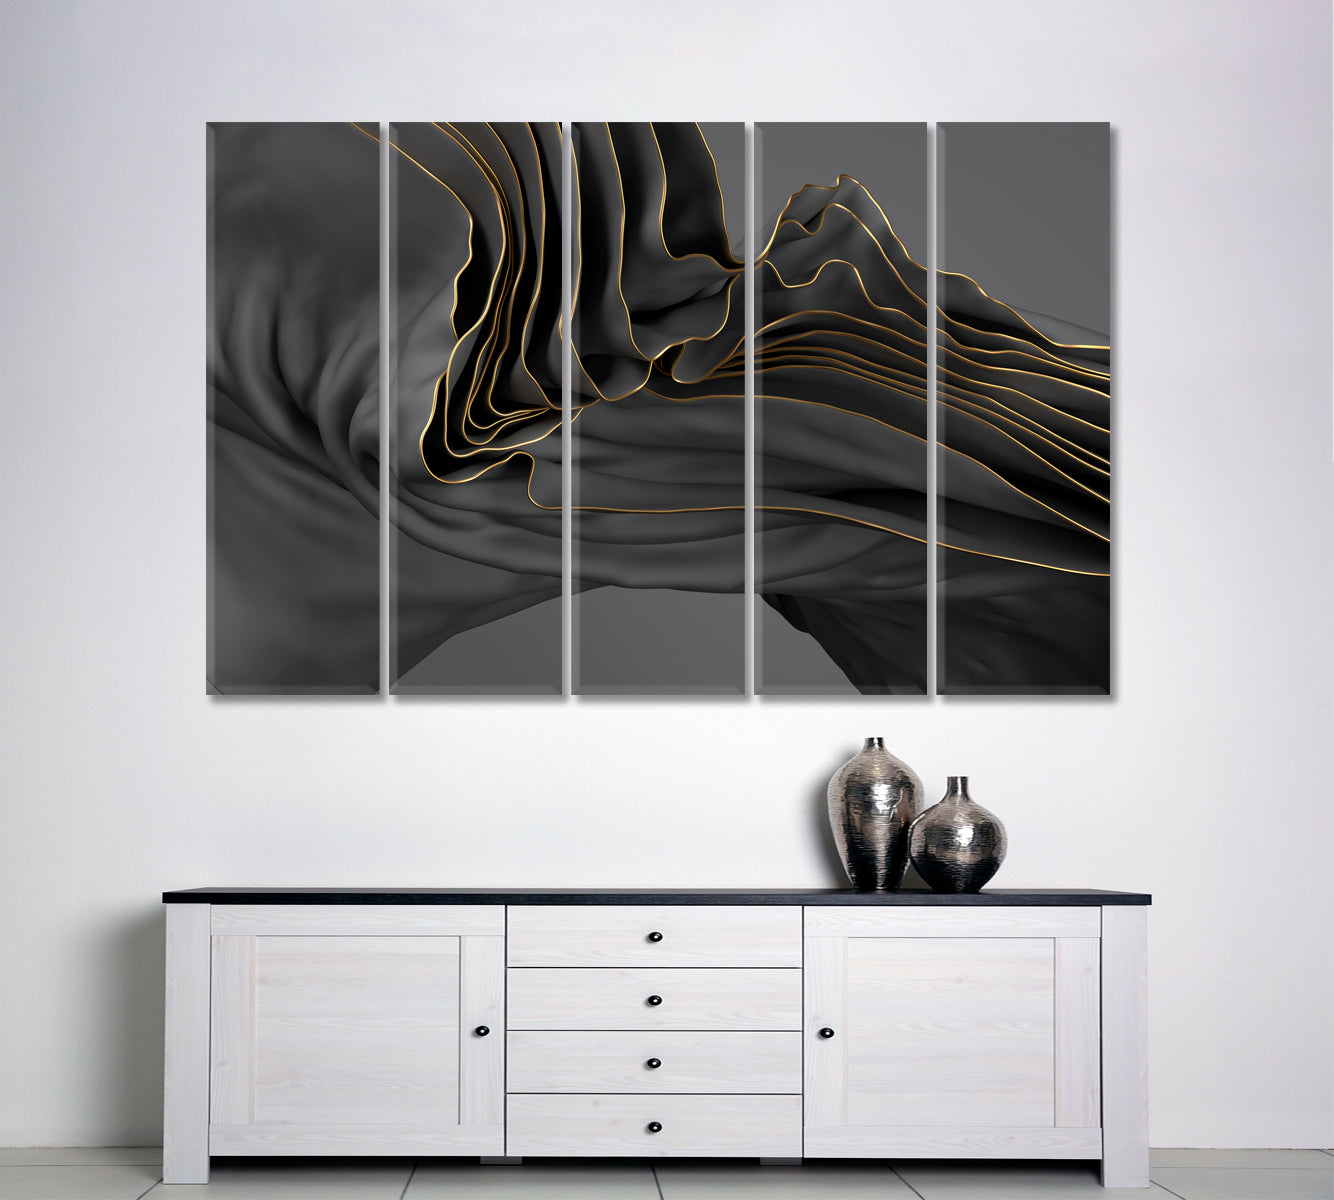 FLOW Beautiful Black Wavy Abstraction Abstract Art Print Artesty 5 panels 36" x 24" 